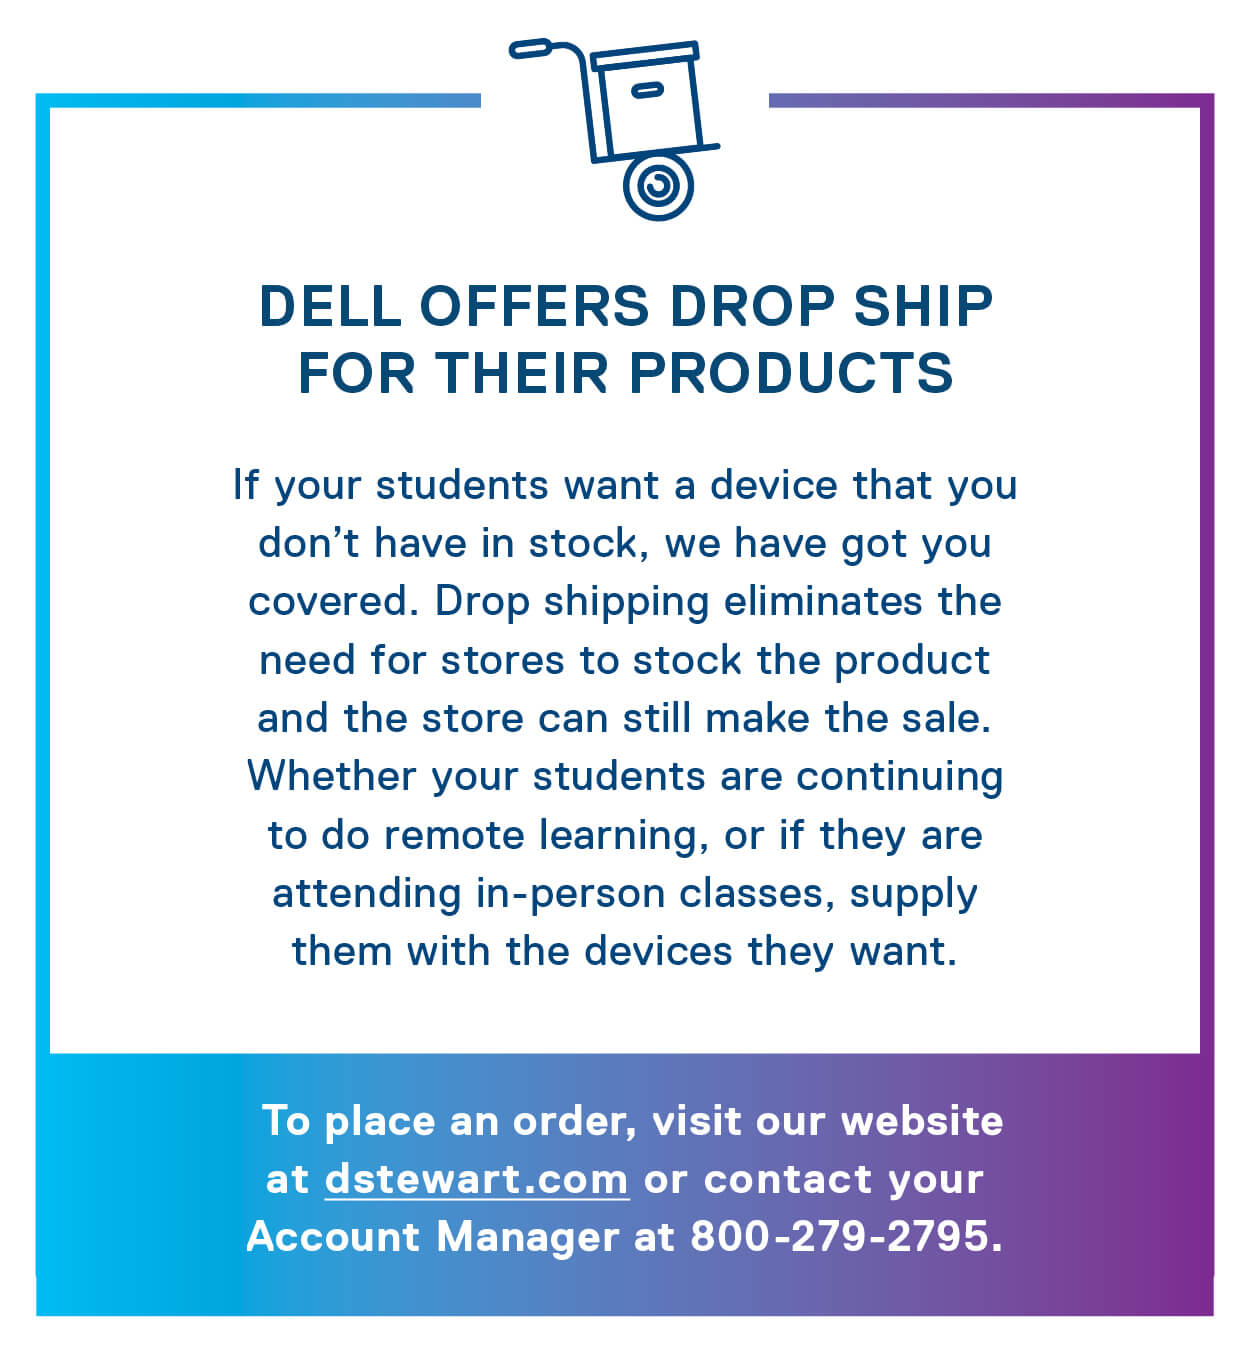 Dell offers drop ship for their products. If your students want a device that you don’t have in stock, we have got you covered. Drop shipping eliminates the need for stores to stock the product and the store can still make the sale. Whether your students are continuing to do remote learning, or if they are attending in-person classes, supply them with the devices they want. 